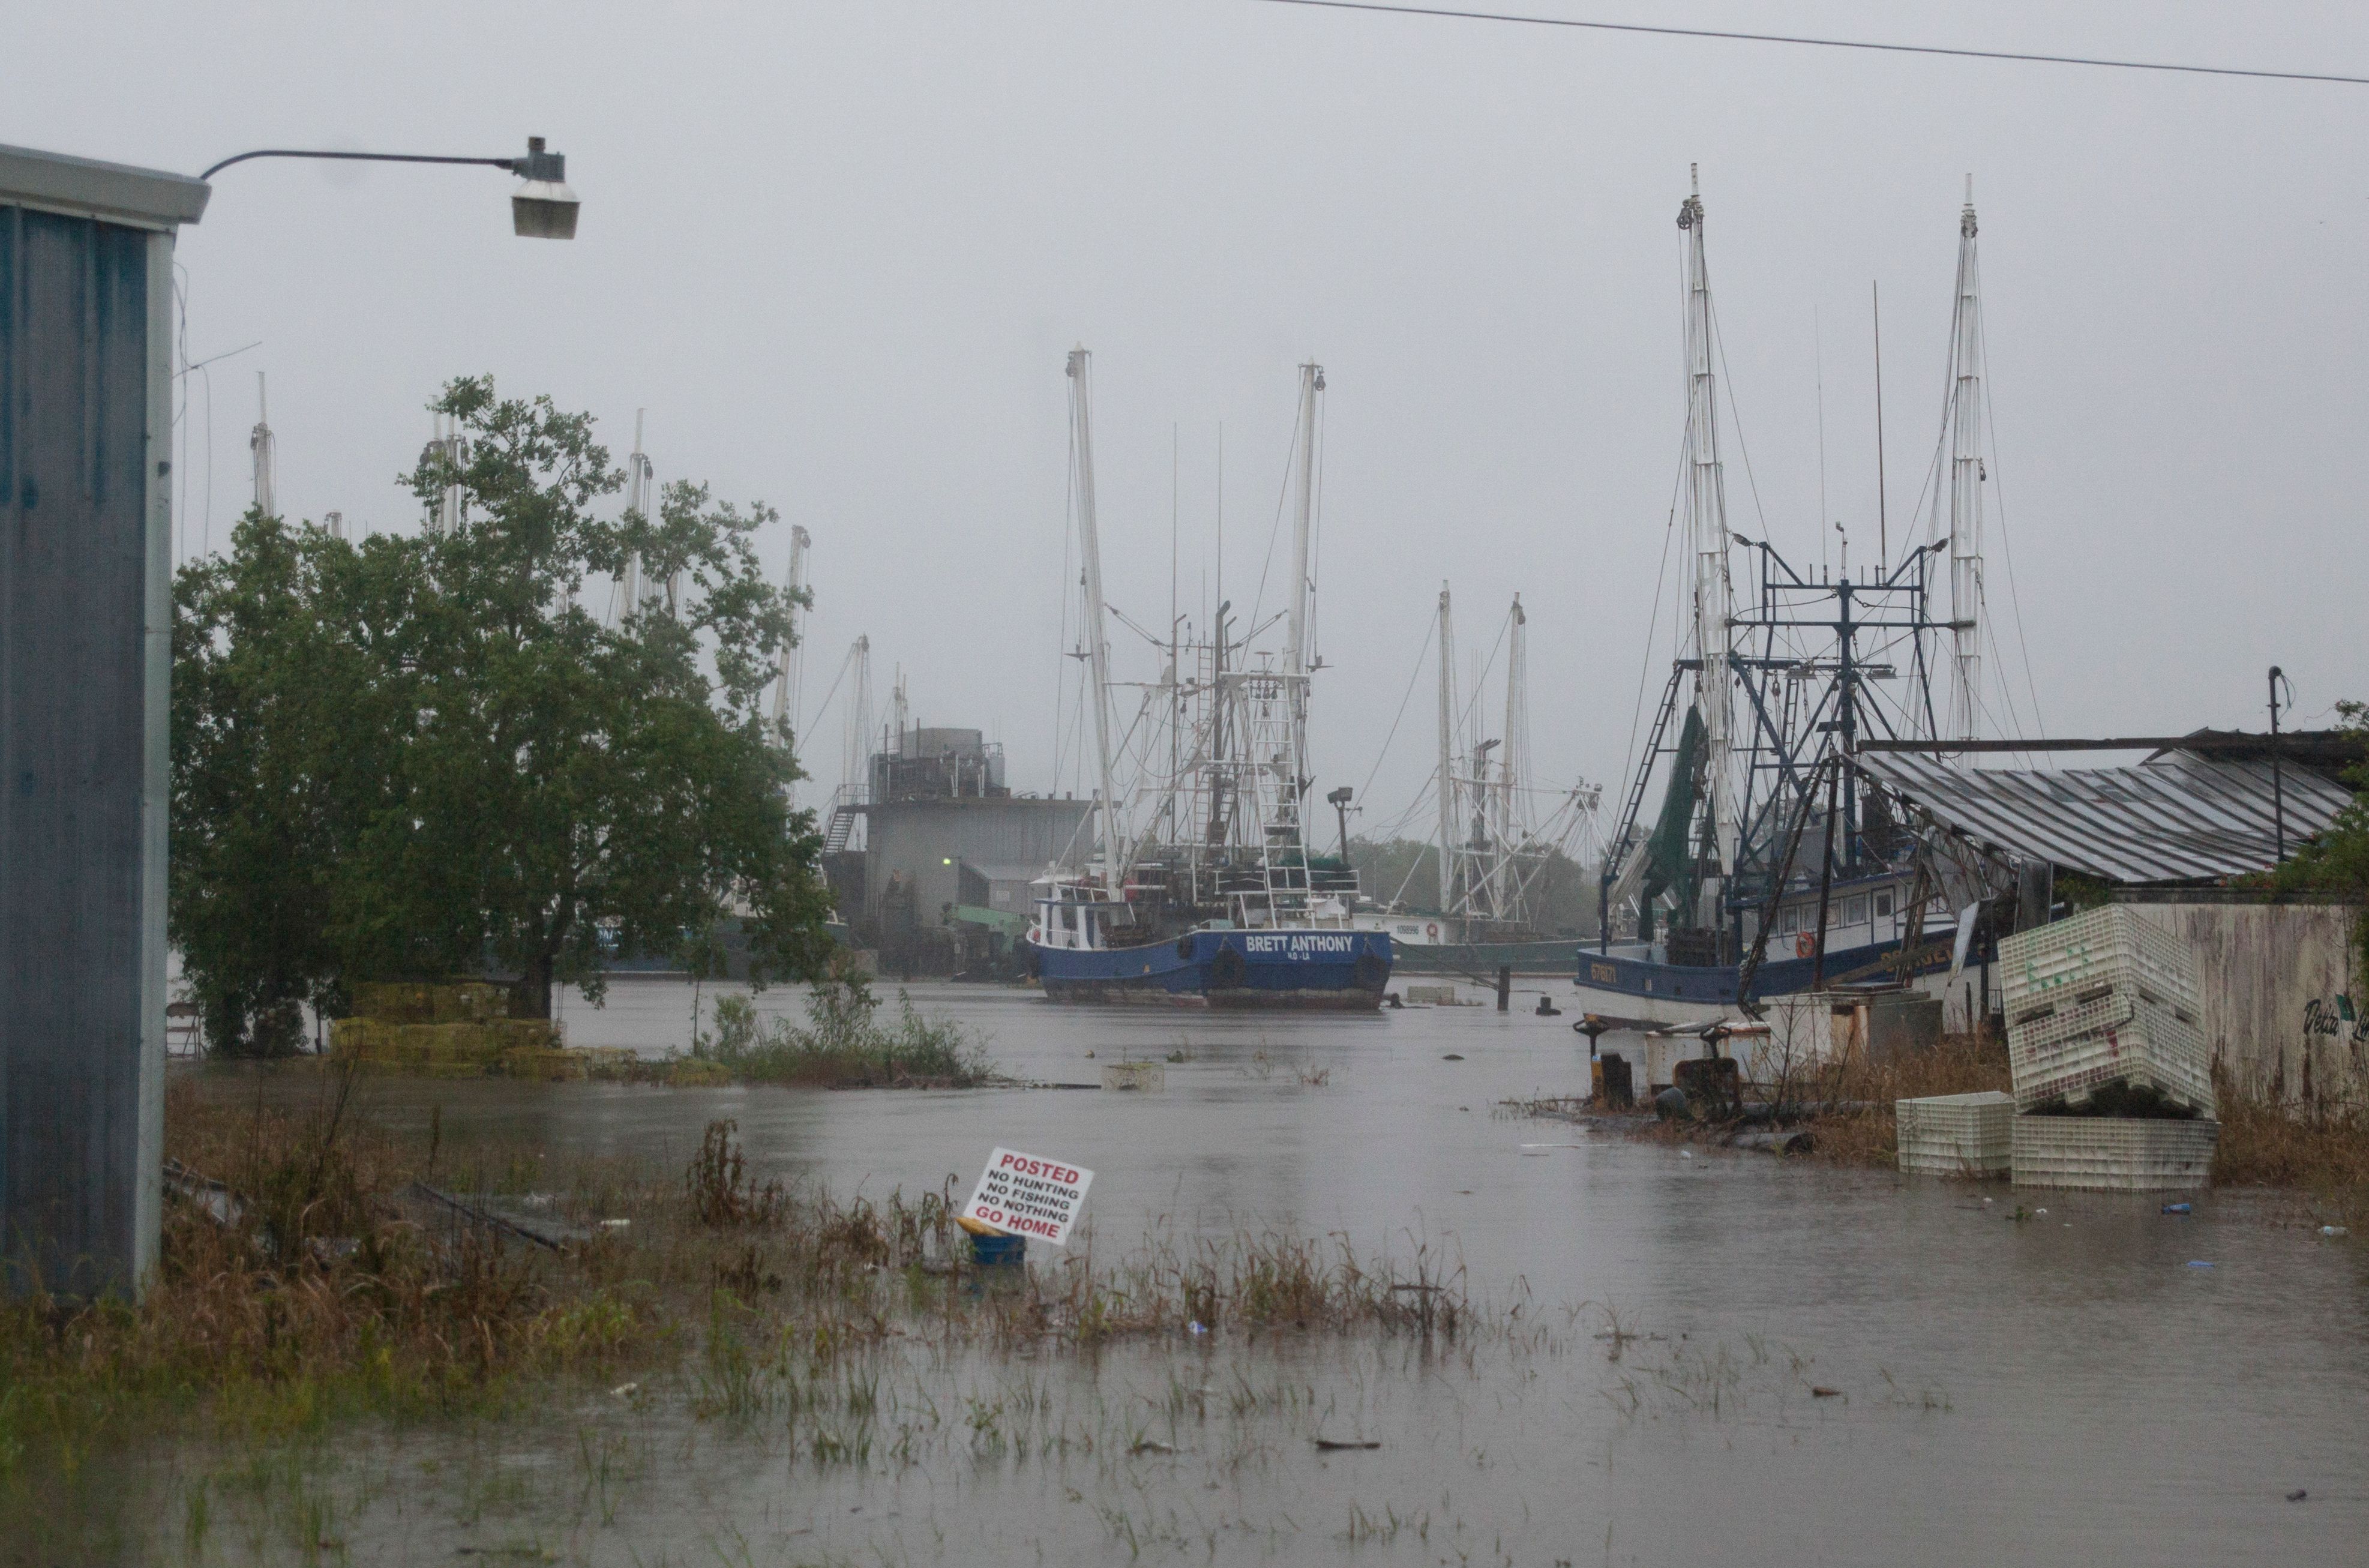 A port floods as Tropical Storm Barry makes landfall in Intracoastal City, Louisiana on July 13.